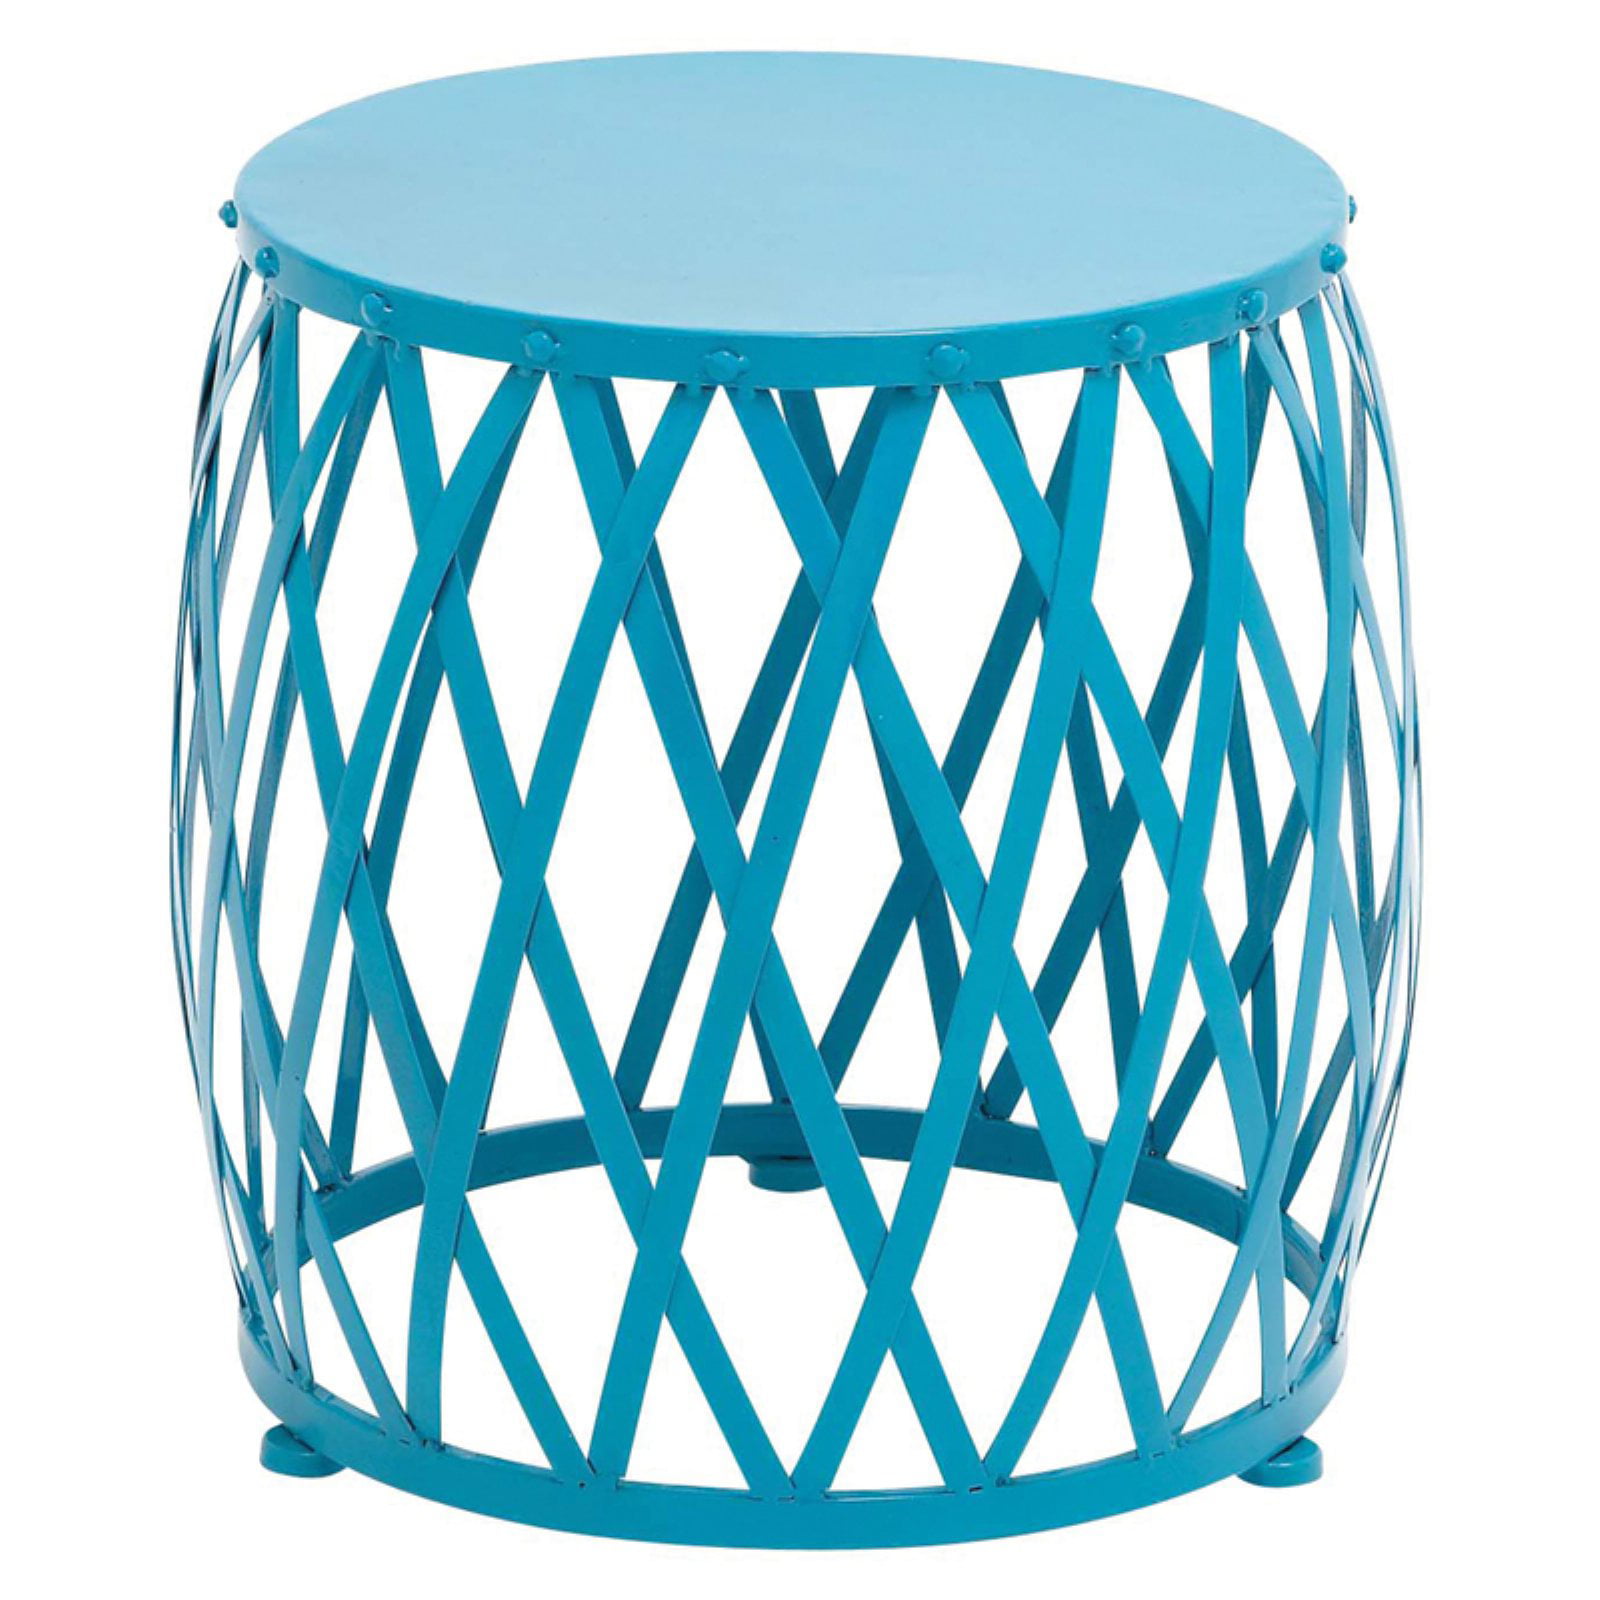 DROPSHIP Benzara 96978 Attractive Styled Metal Accent Table 19.2 x 19.2 x 19.2 Blue Benzara Woodland Imports 